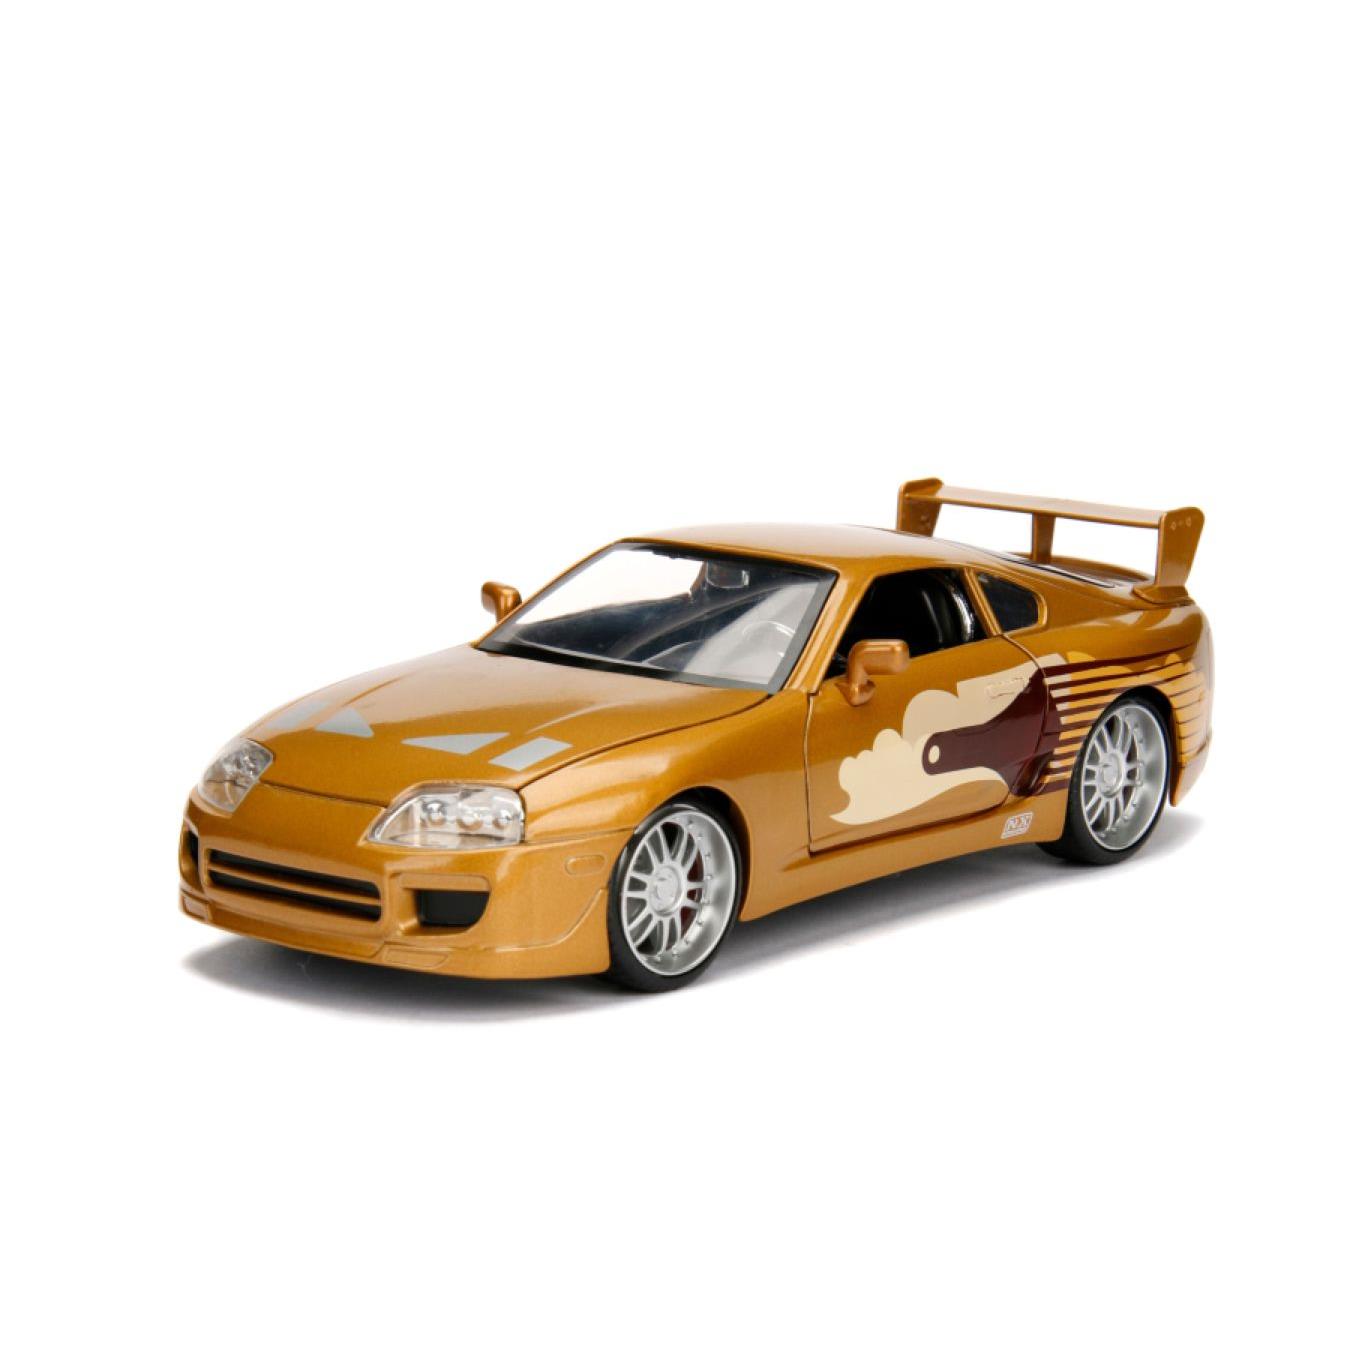 fast and furious - 1995 toyota supra 1:24 scale hollywood ride vehicle replica